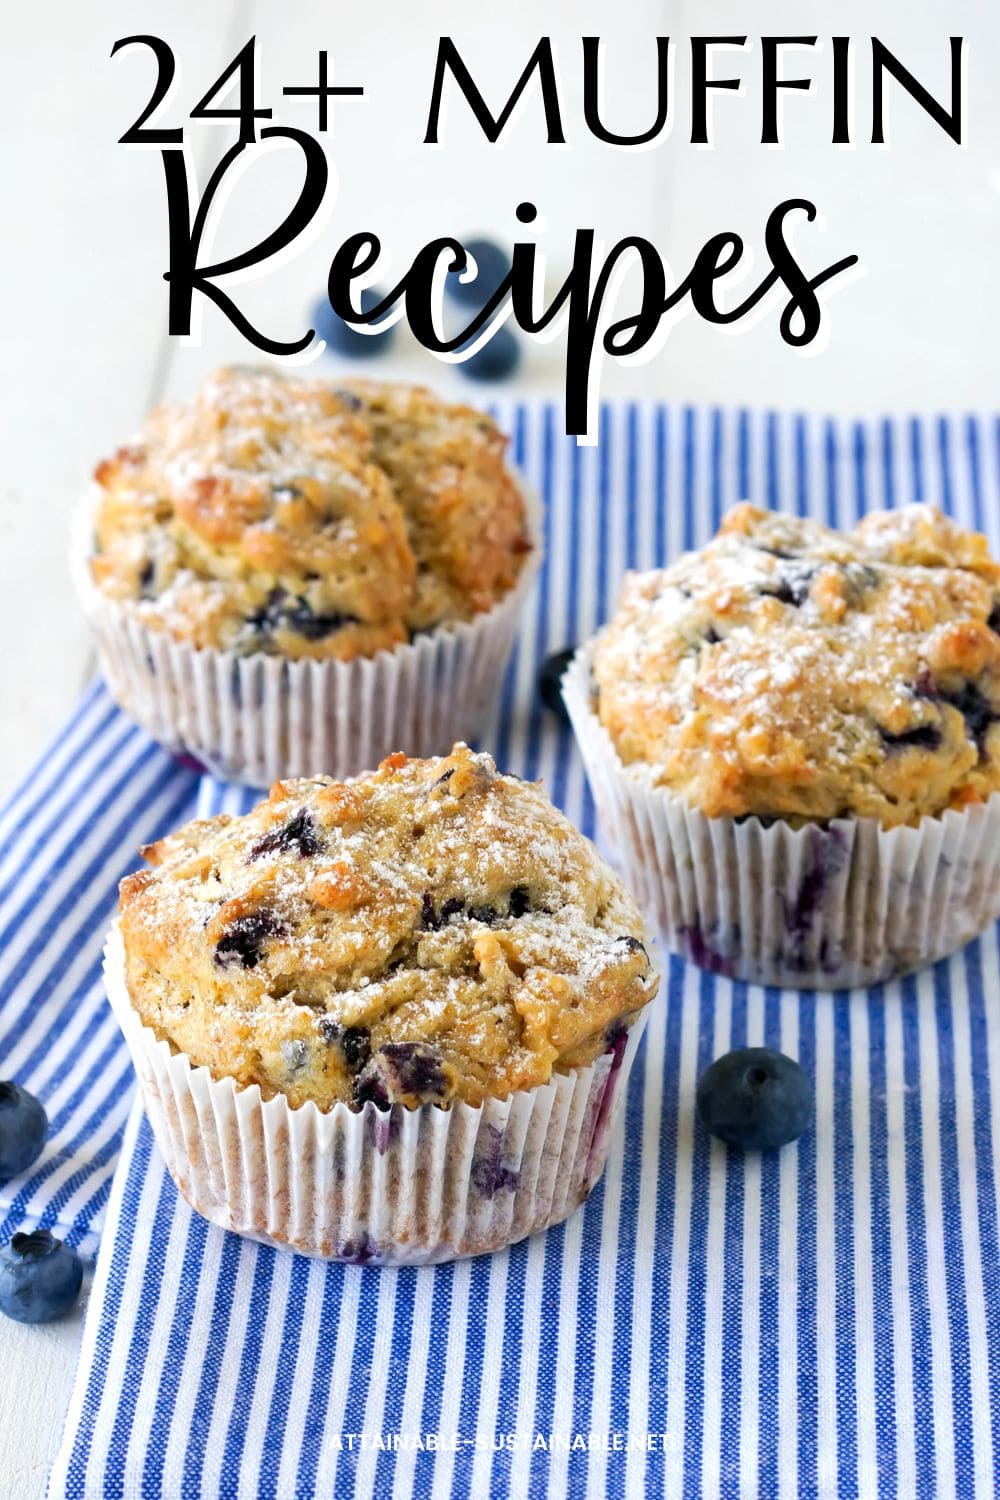 blueberry muffins on a blue and white striped towel.